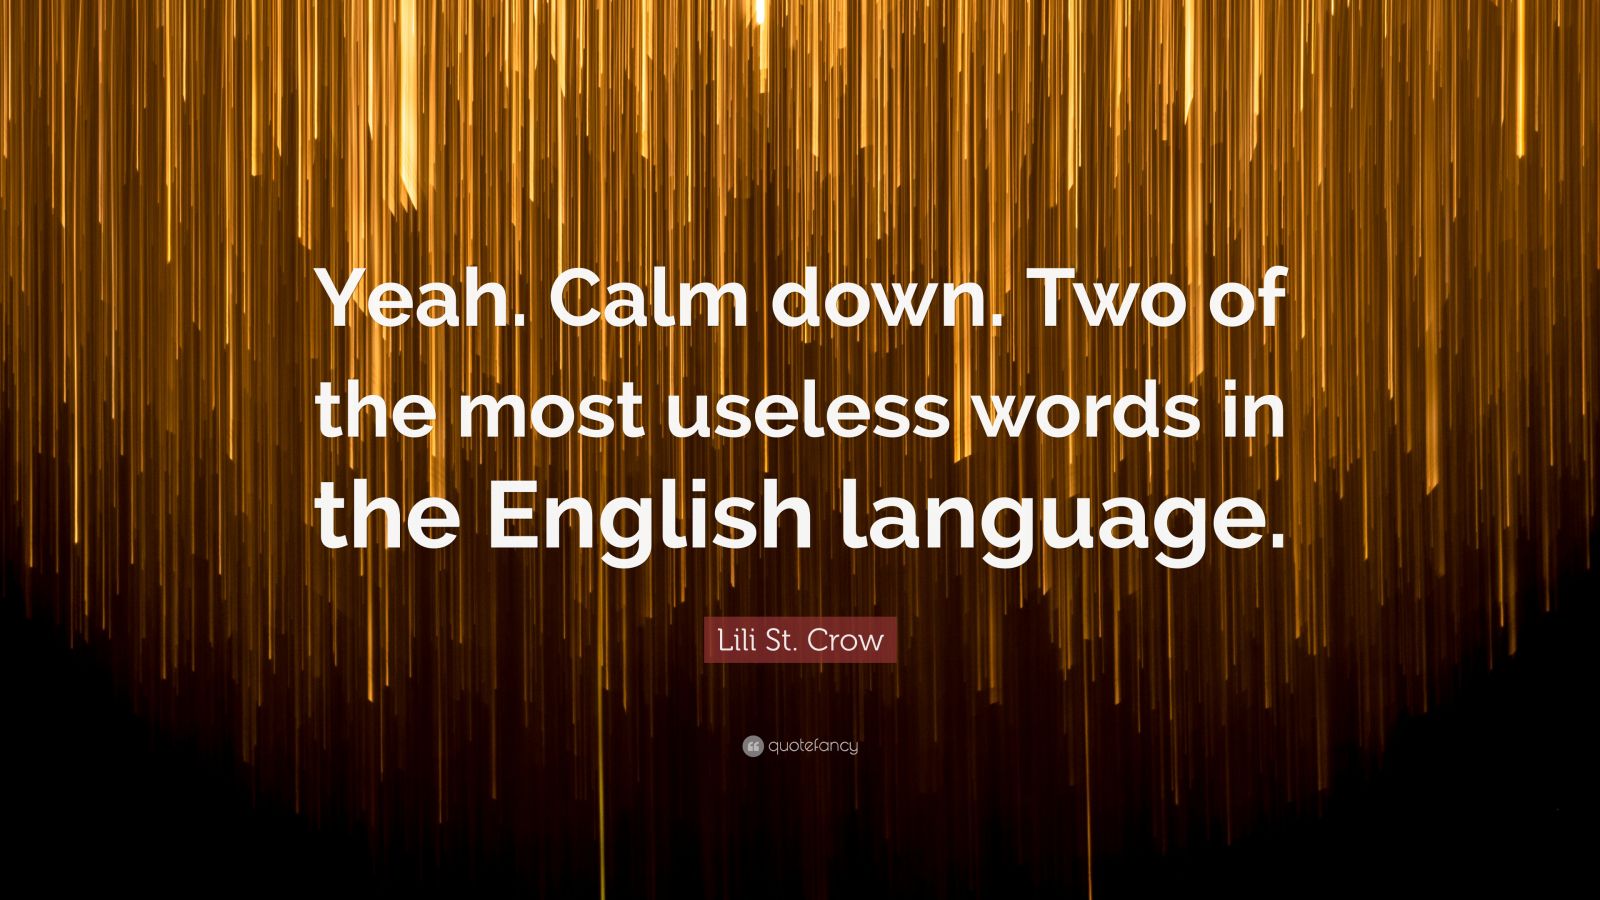 Lili St. Crow Quote “Yeah. Calm down. Two of the most useless words in